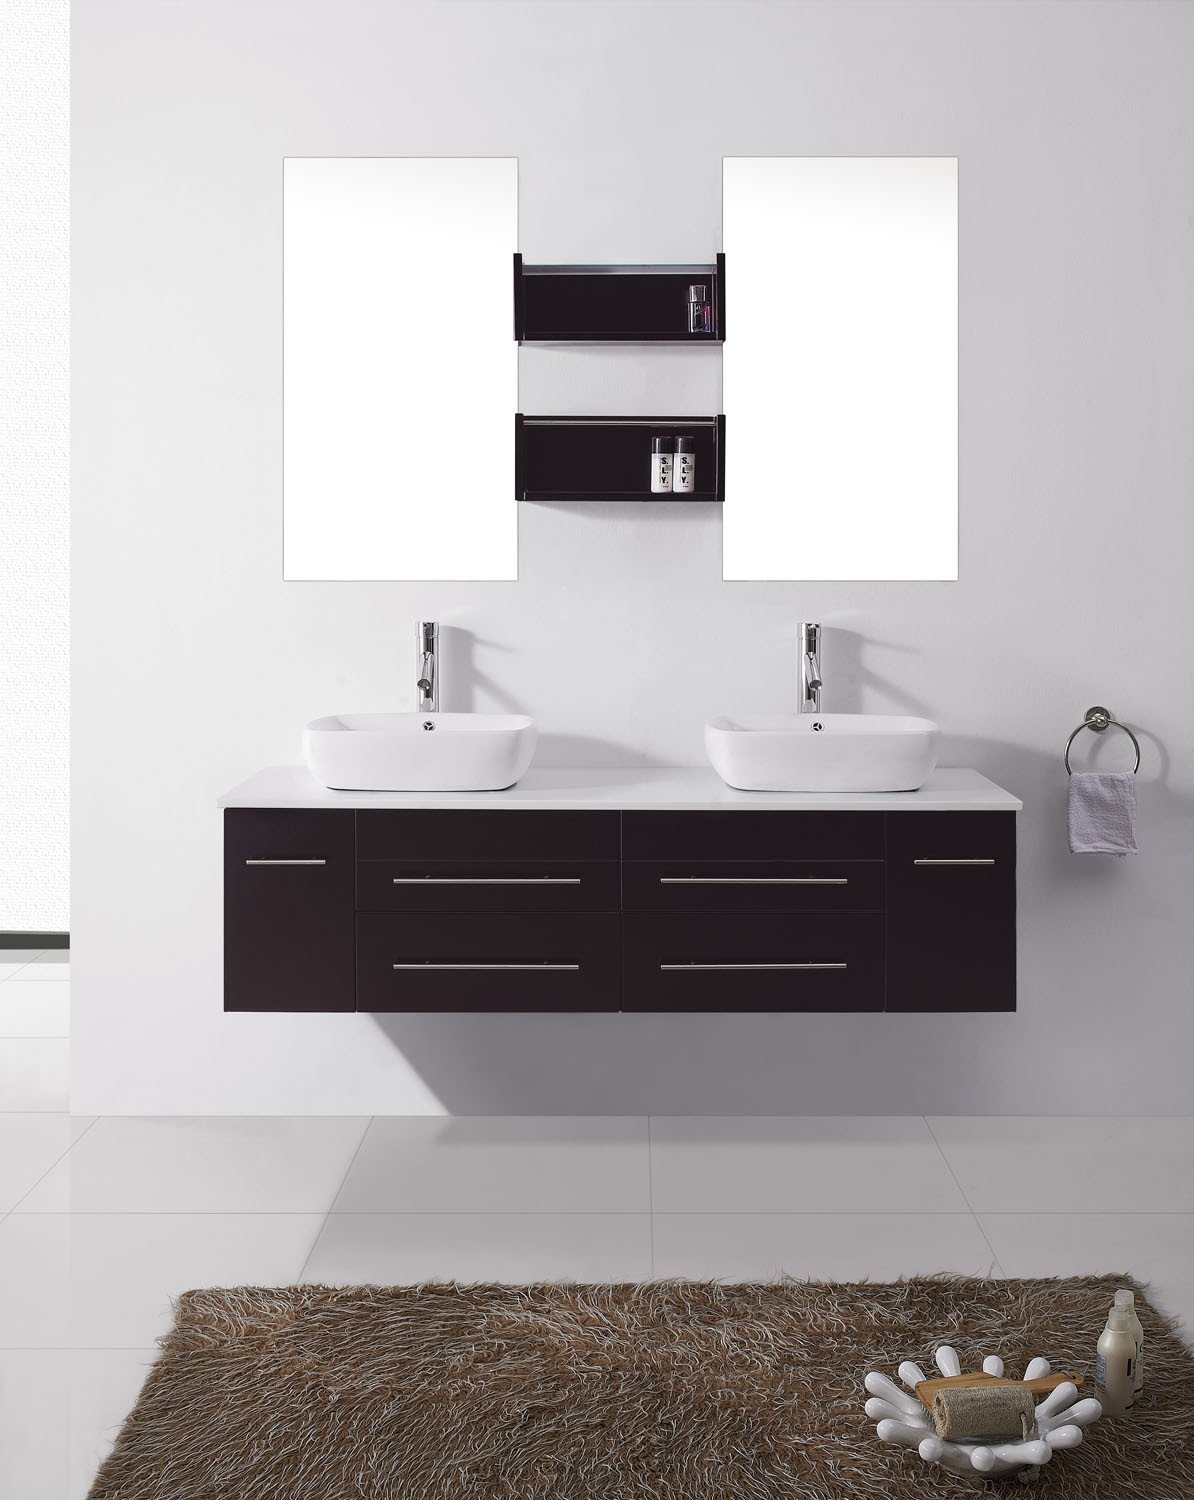 Virtu USA Augustine 59" Double Square Sink Espresso Top Vanity in Espresso with Polished Chrome Faucet and Mirrors Vanity Virtu USA 